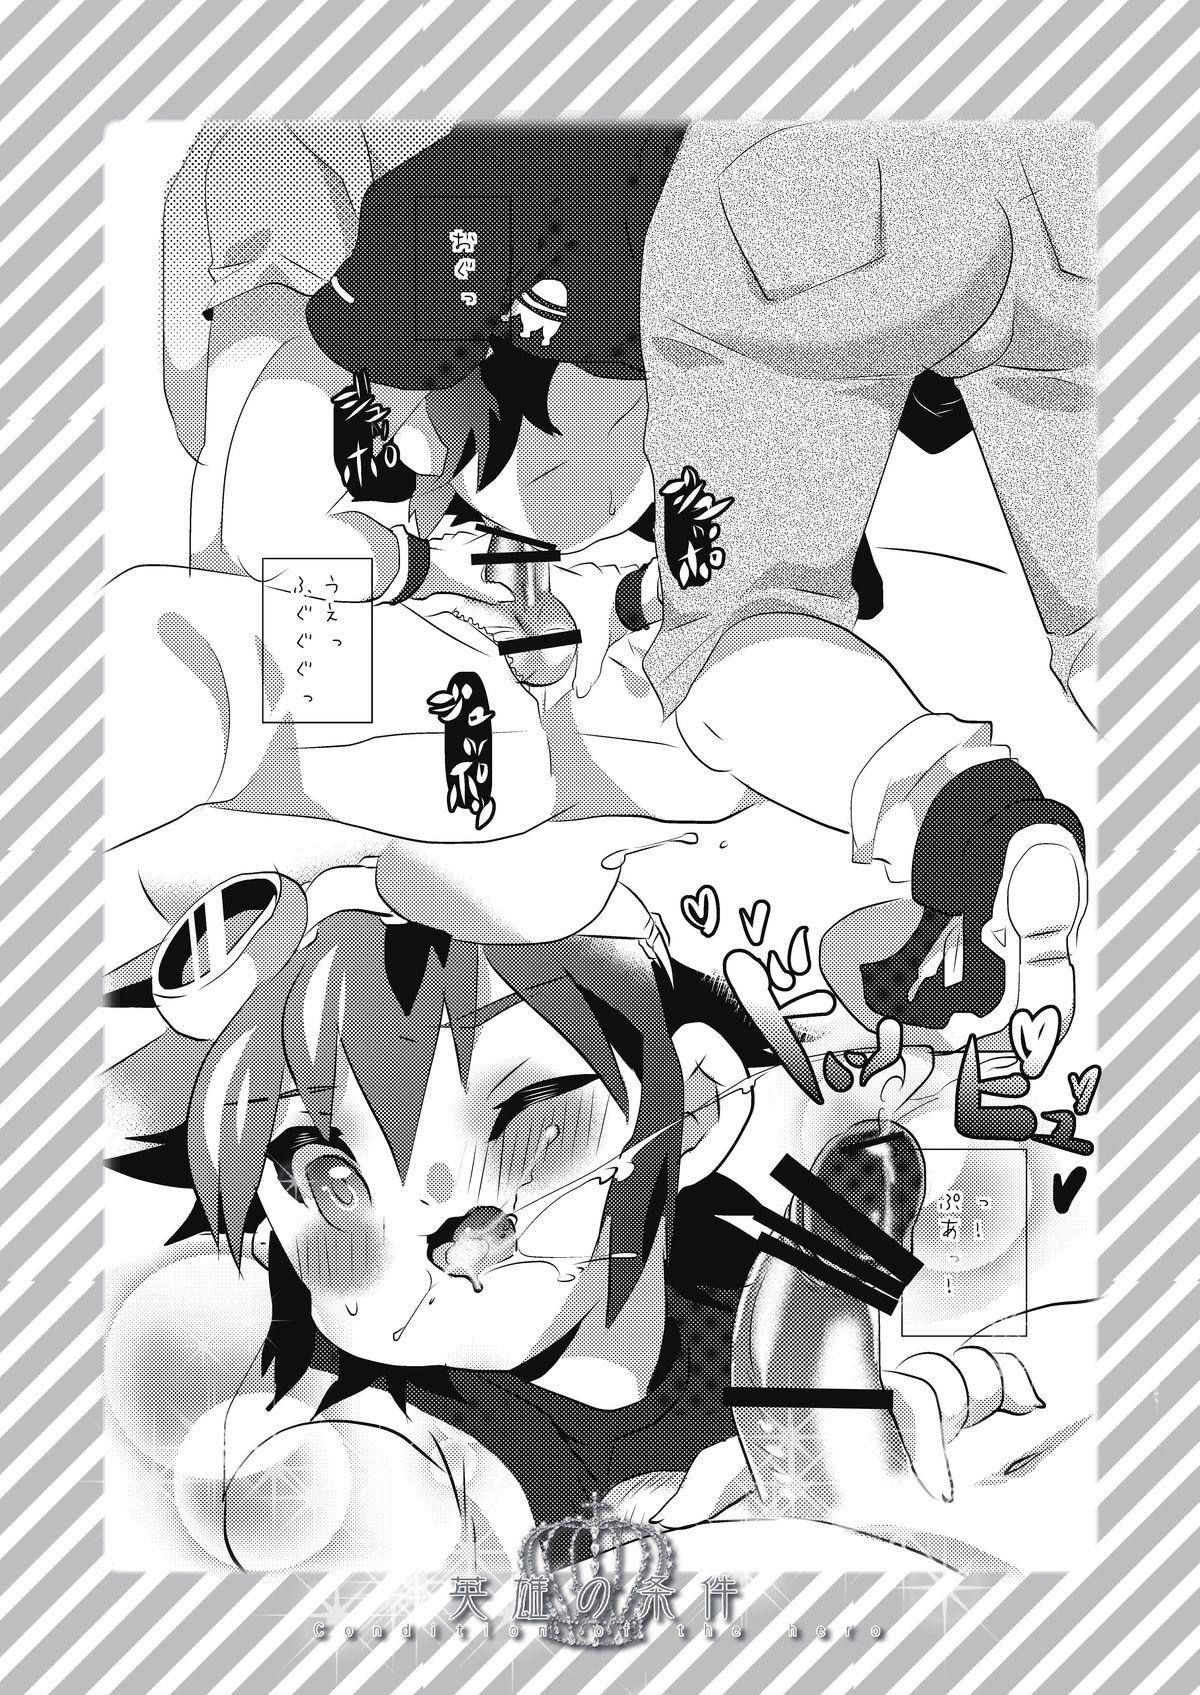 Cumload Eiyuu no Jouken - Condition of the Hero - Digimon xros wars Passion - Page 6